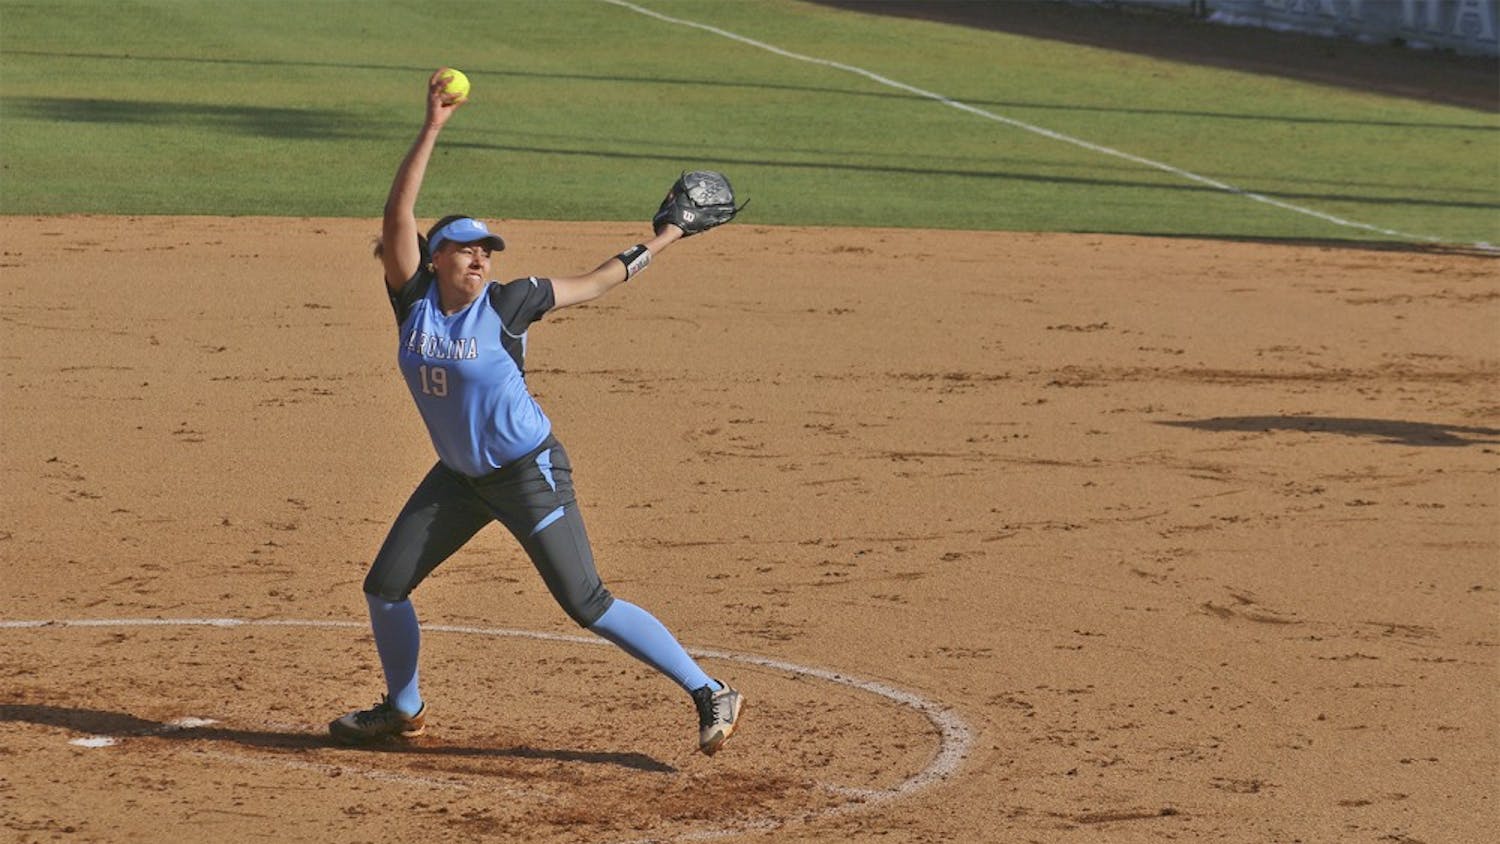 Freshman pitcher Kaylee Carlson pitched a complete game against Virginia Tech in game one of a doubleheader.